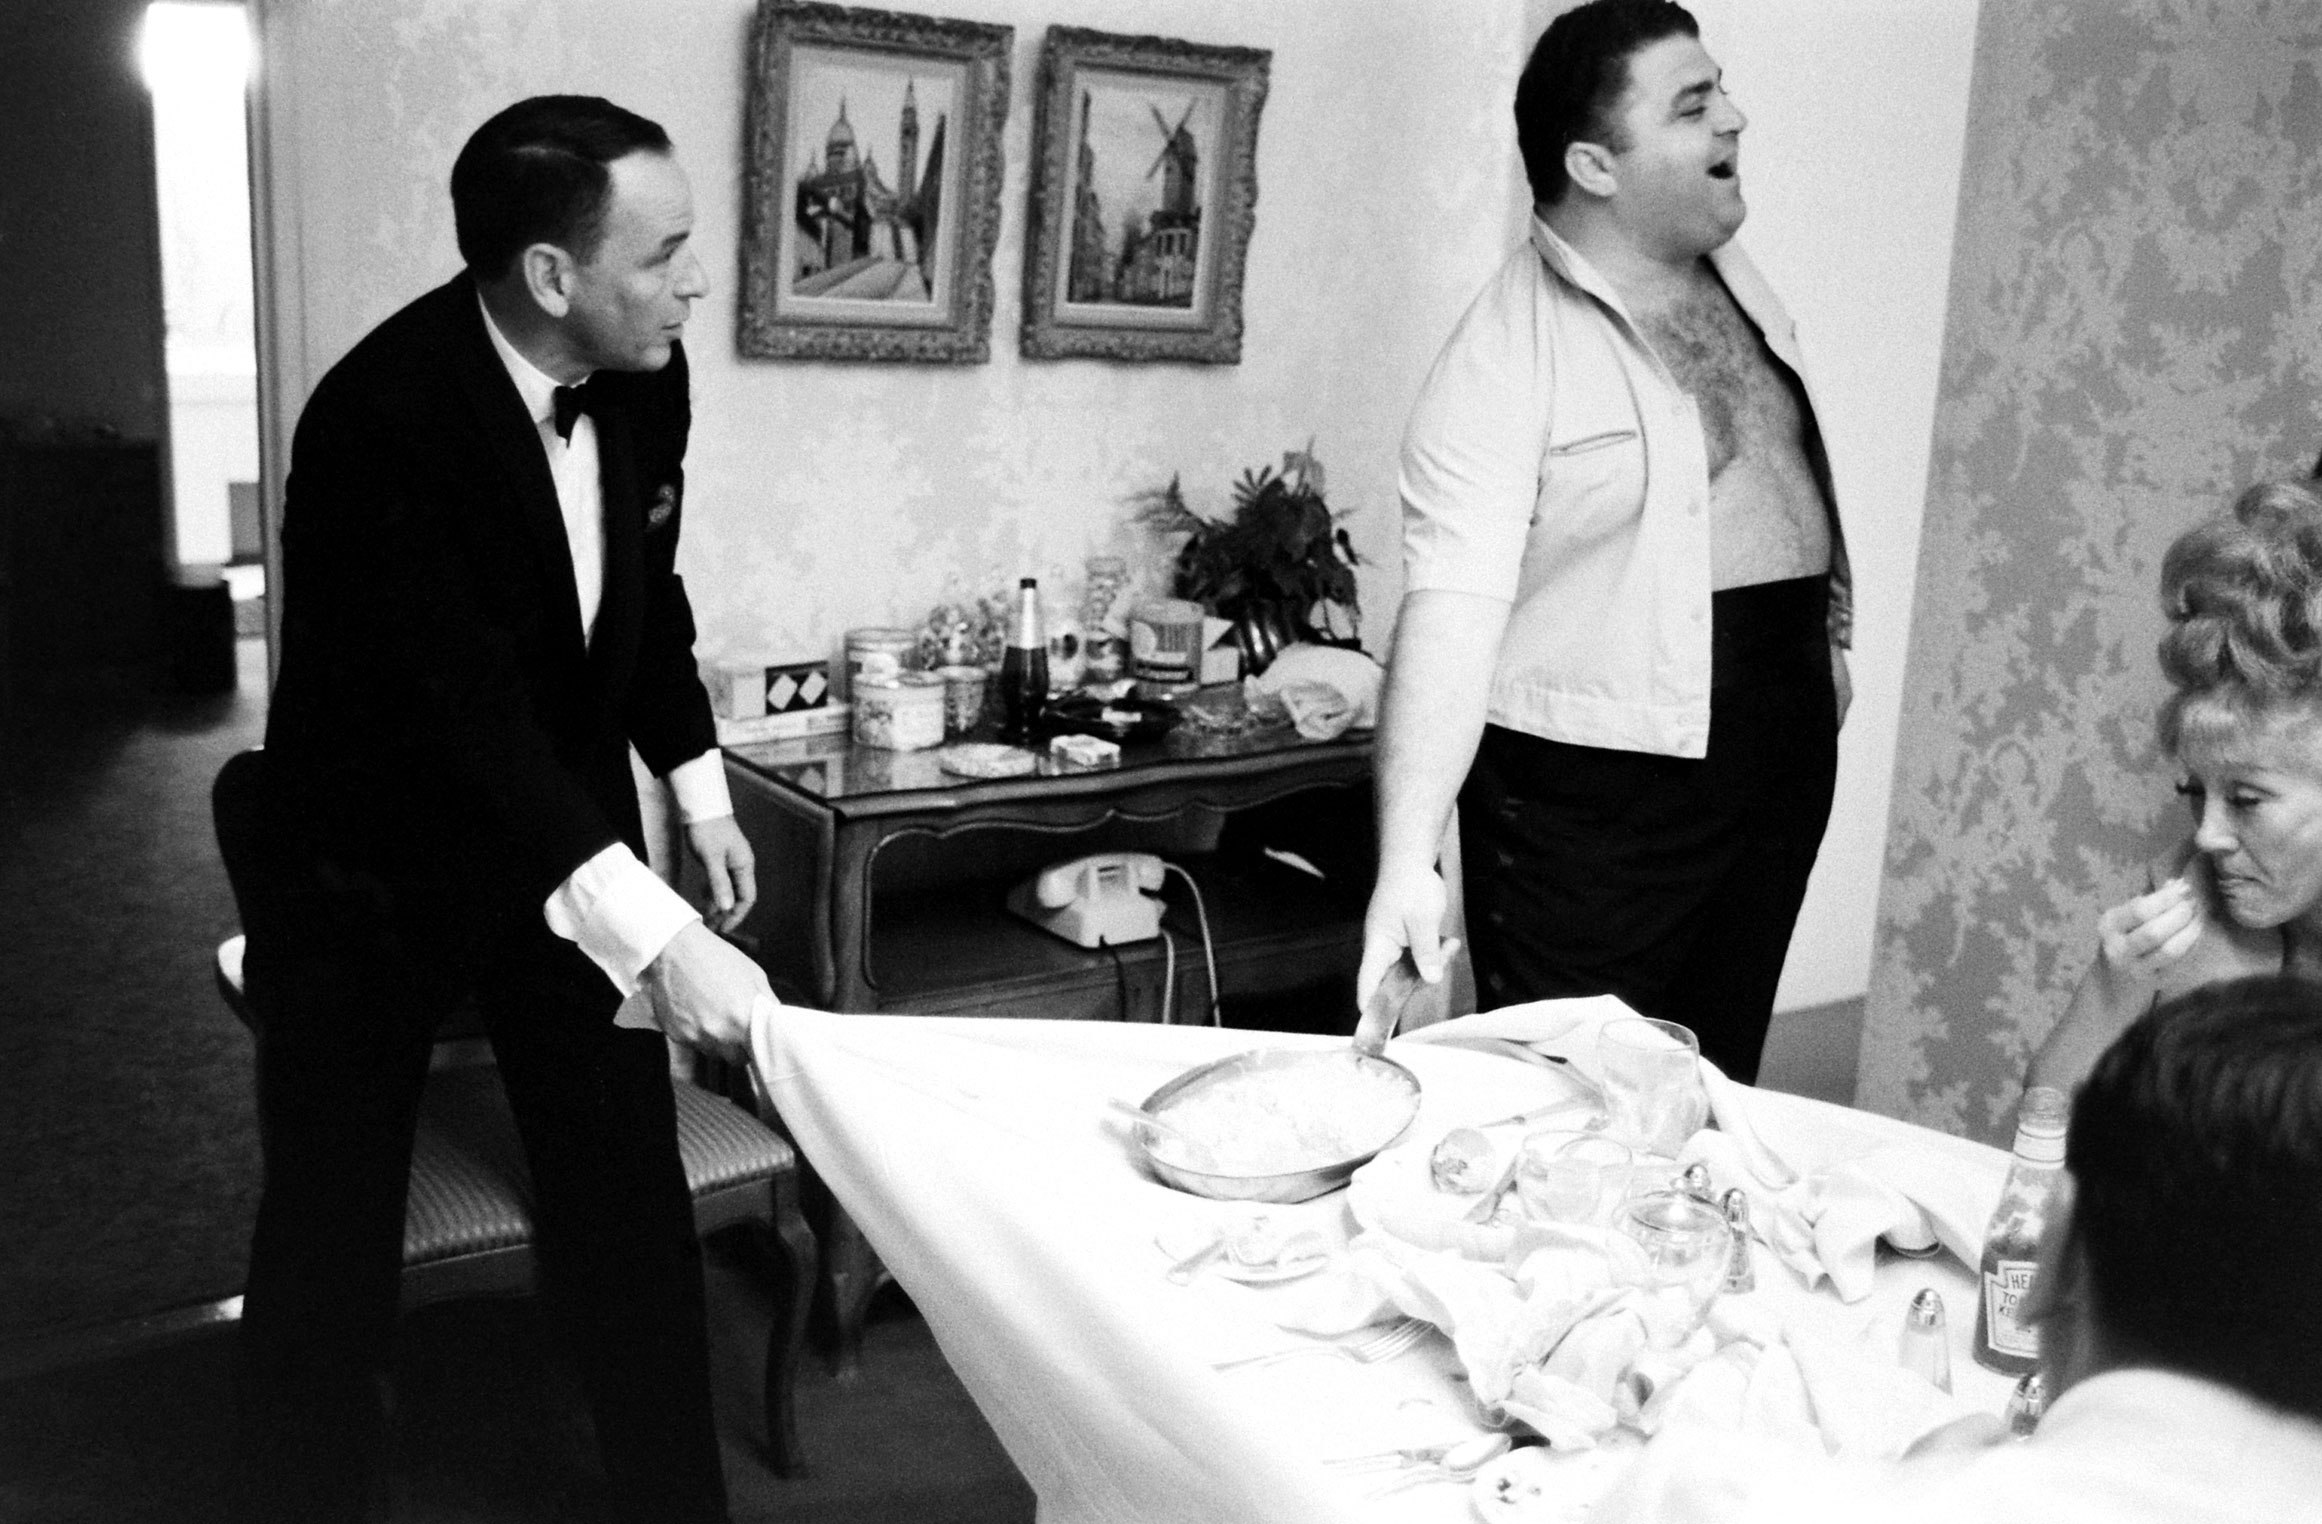 In Miami, where he appeared with Joe E. Lewis for two weeks this year, Sinatra ... tells his bodyguard, Ed Pucci, that he will clear the table by yanking the cloth off without disturbing the china.